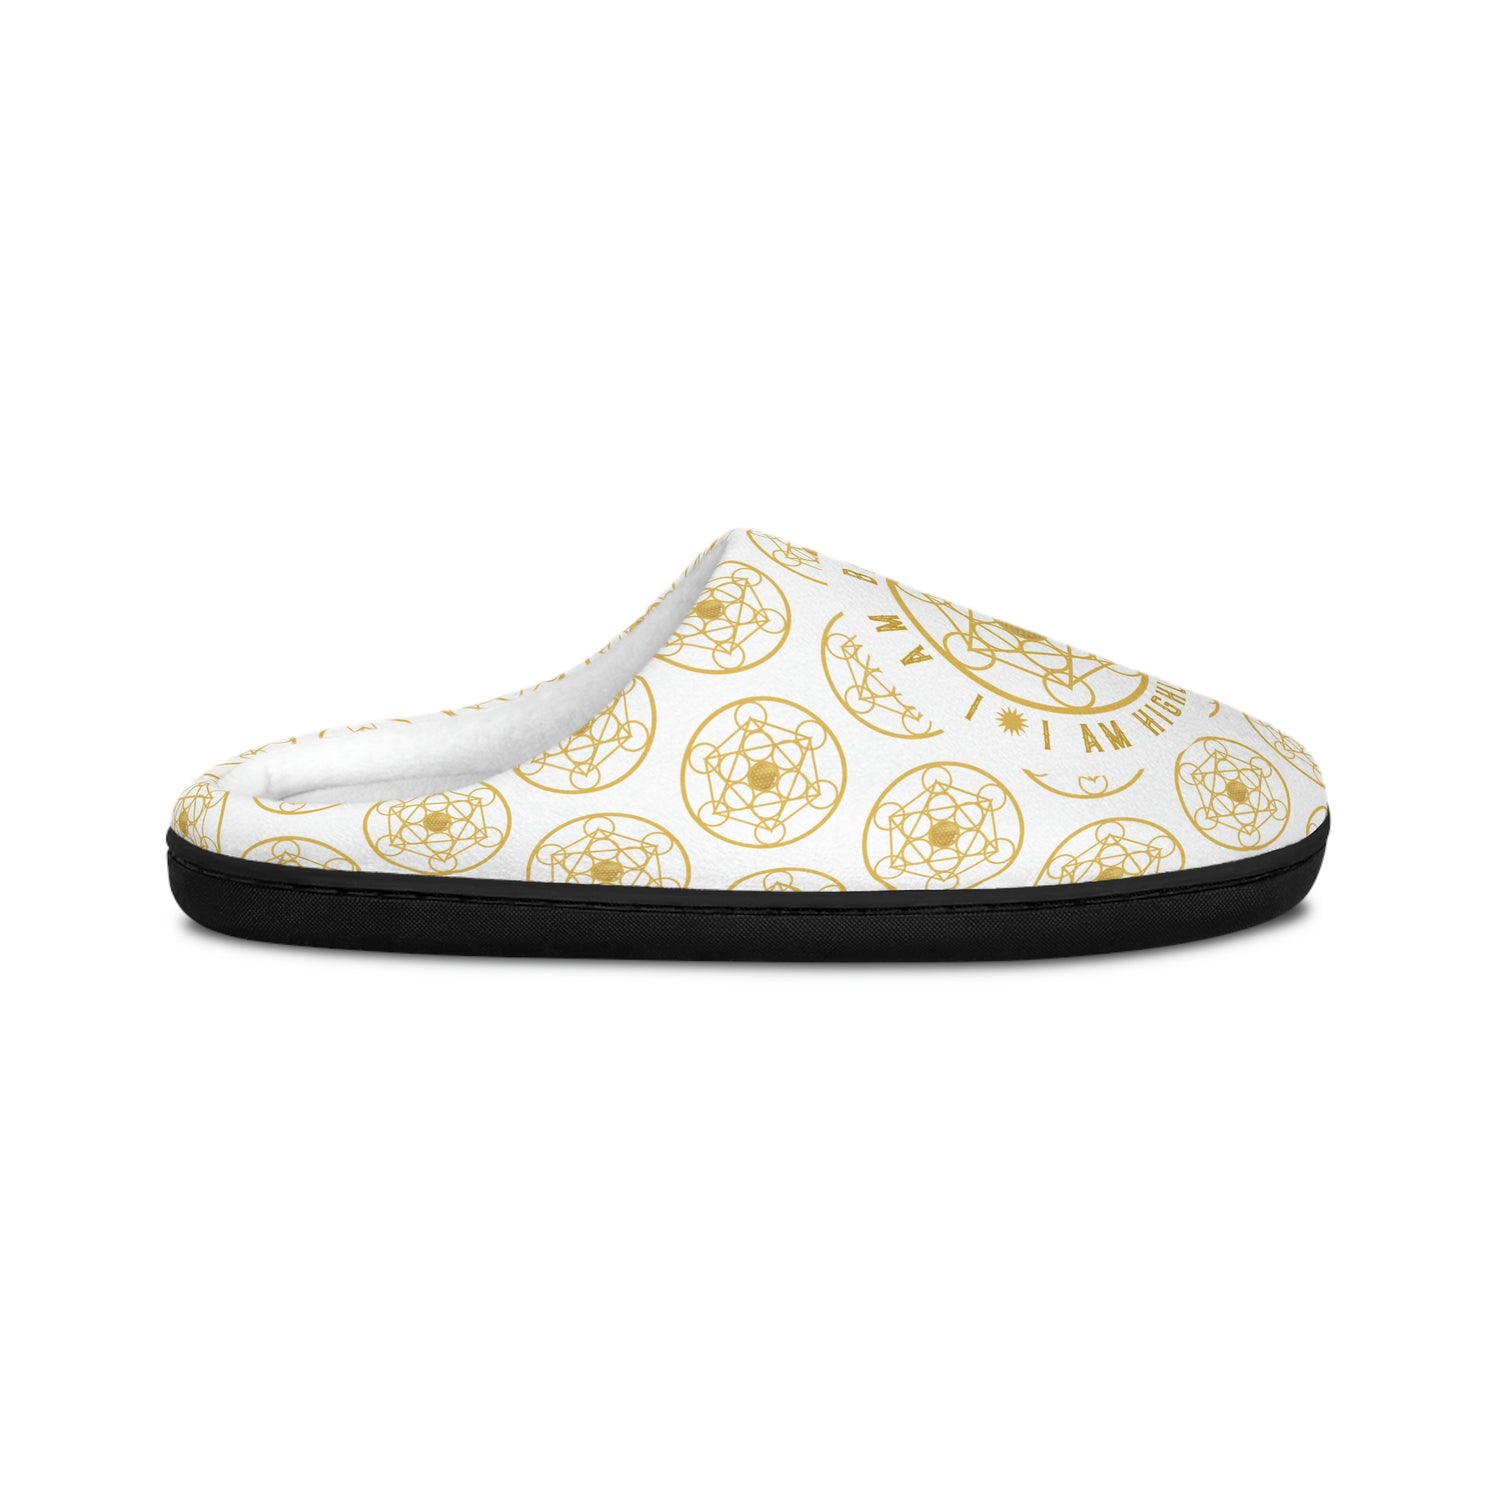 I AM BLESSED I AM HIGHLY FAVORED - Men's Indoor Slippers - White